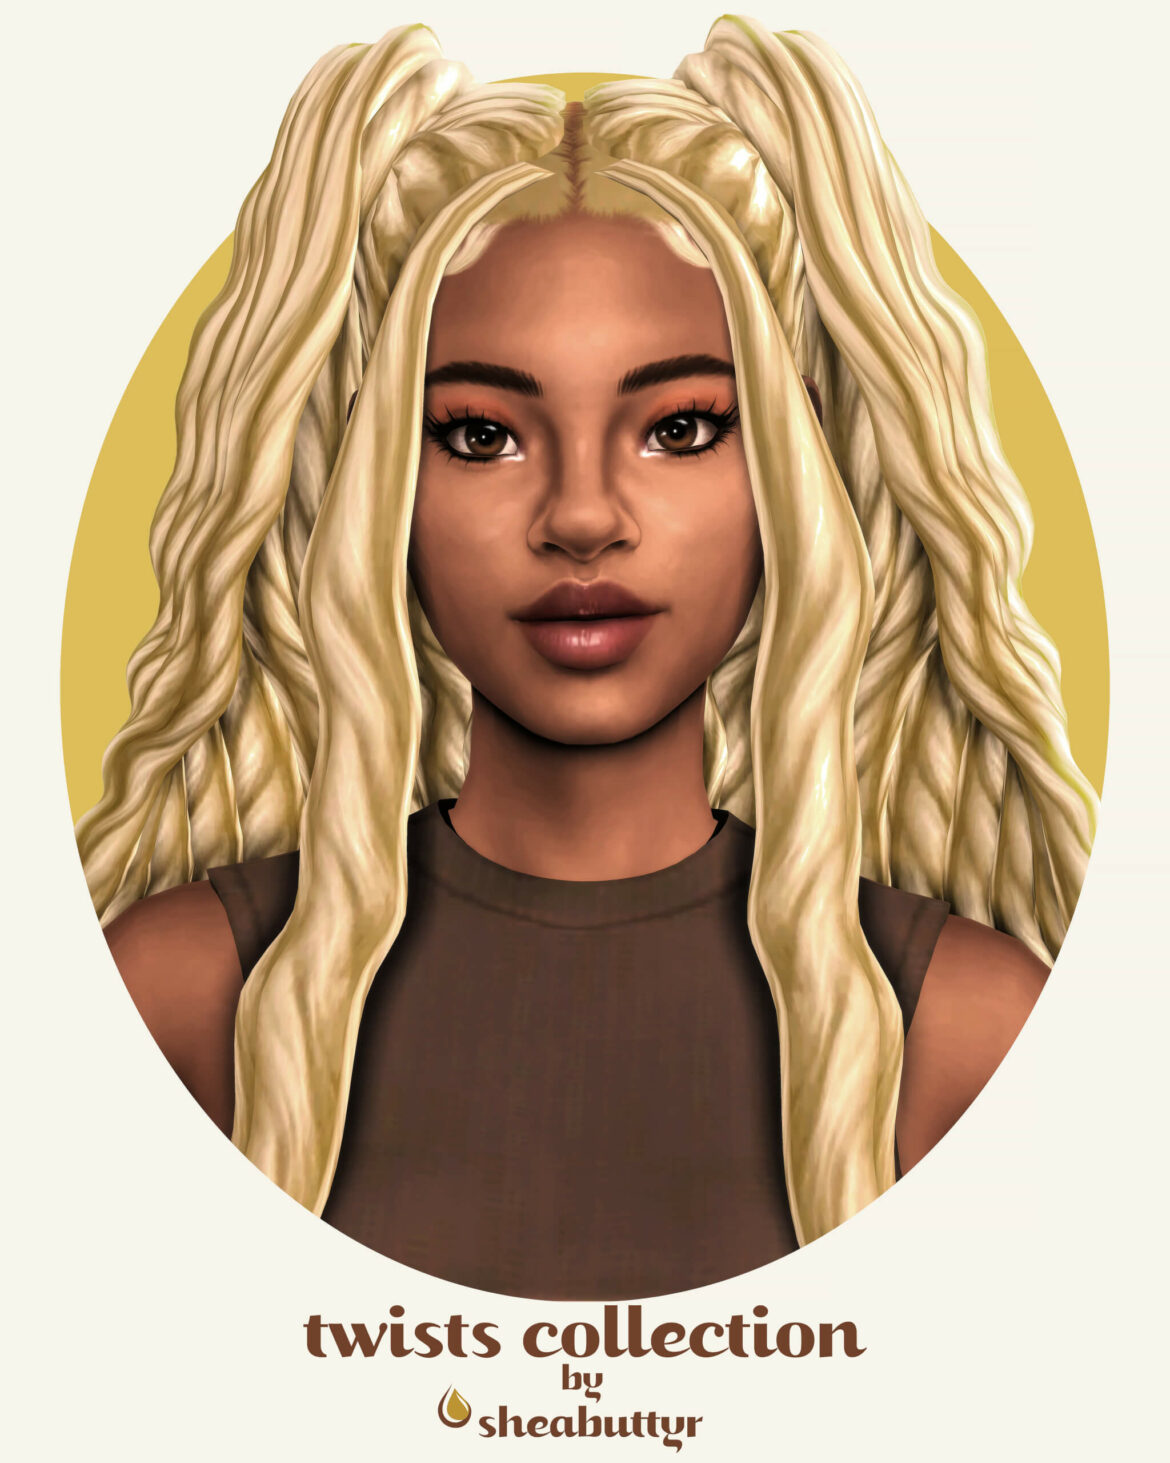 The Sims 4 Twists Collection Maxis Match Female Hair The Sims Game